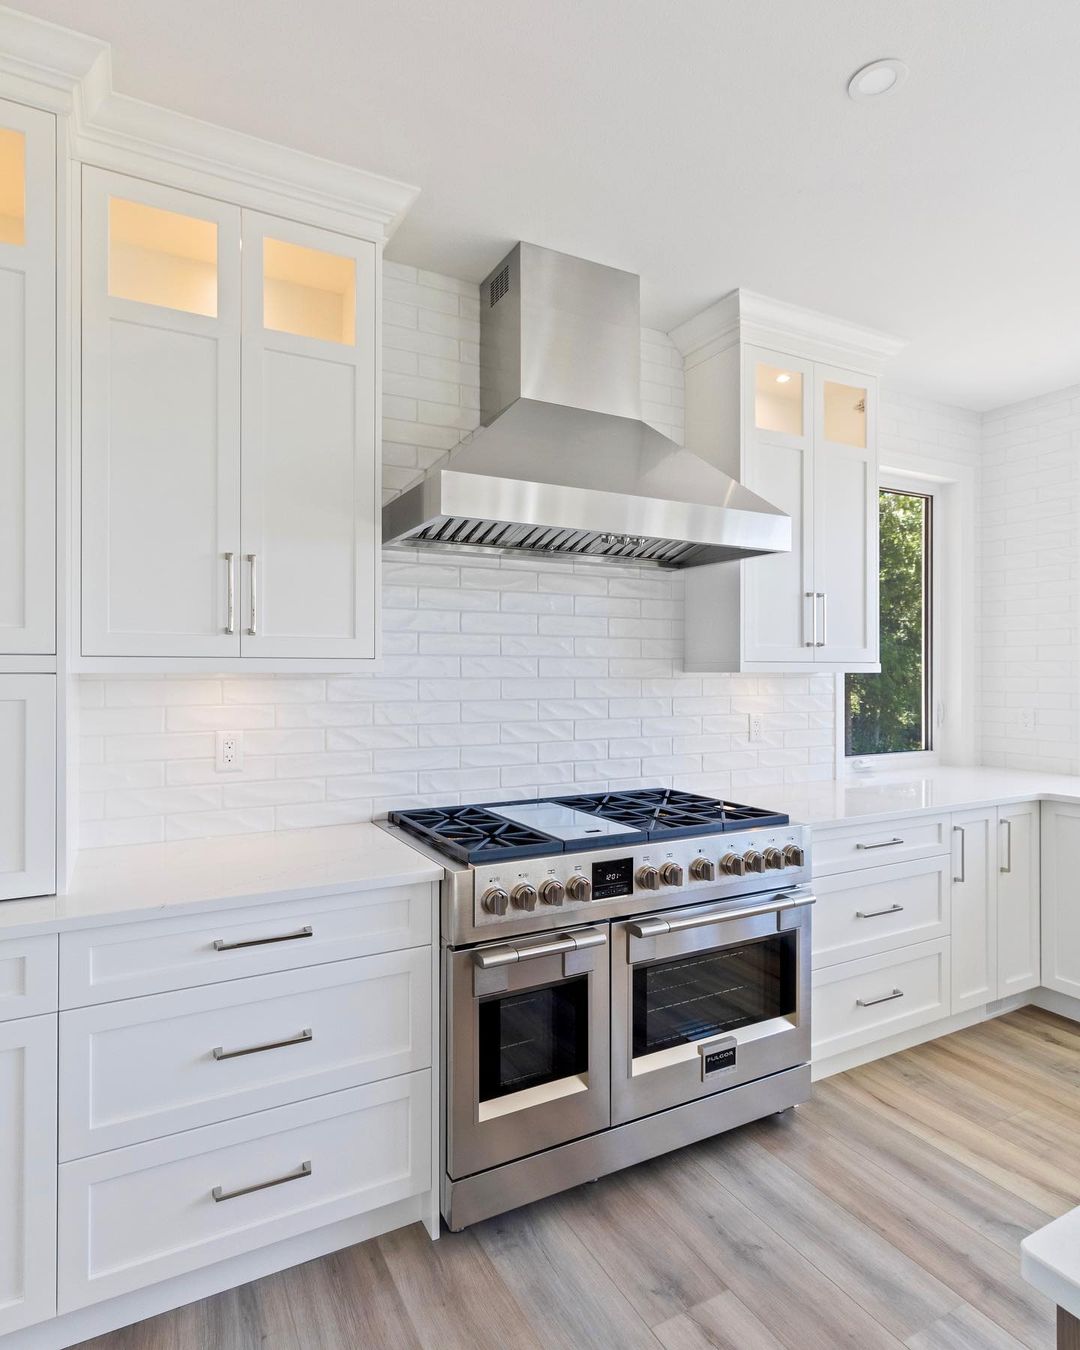 How Much CFM Do I Need for My Range Hood? A Guide to Choosing the Right Ventilation Power